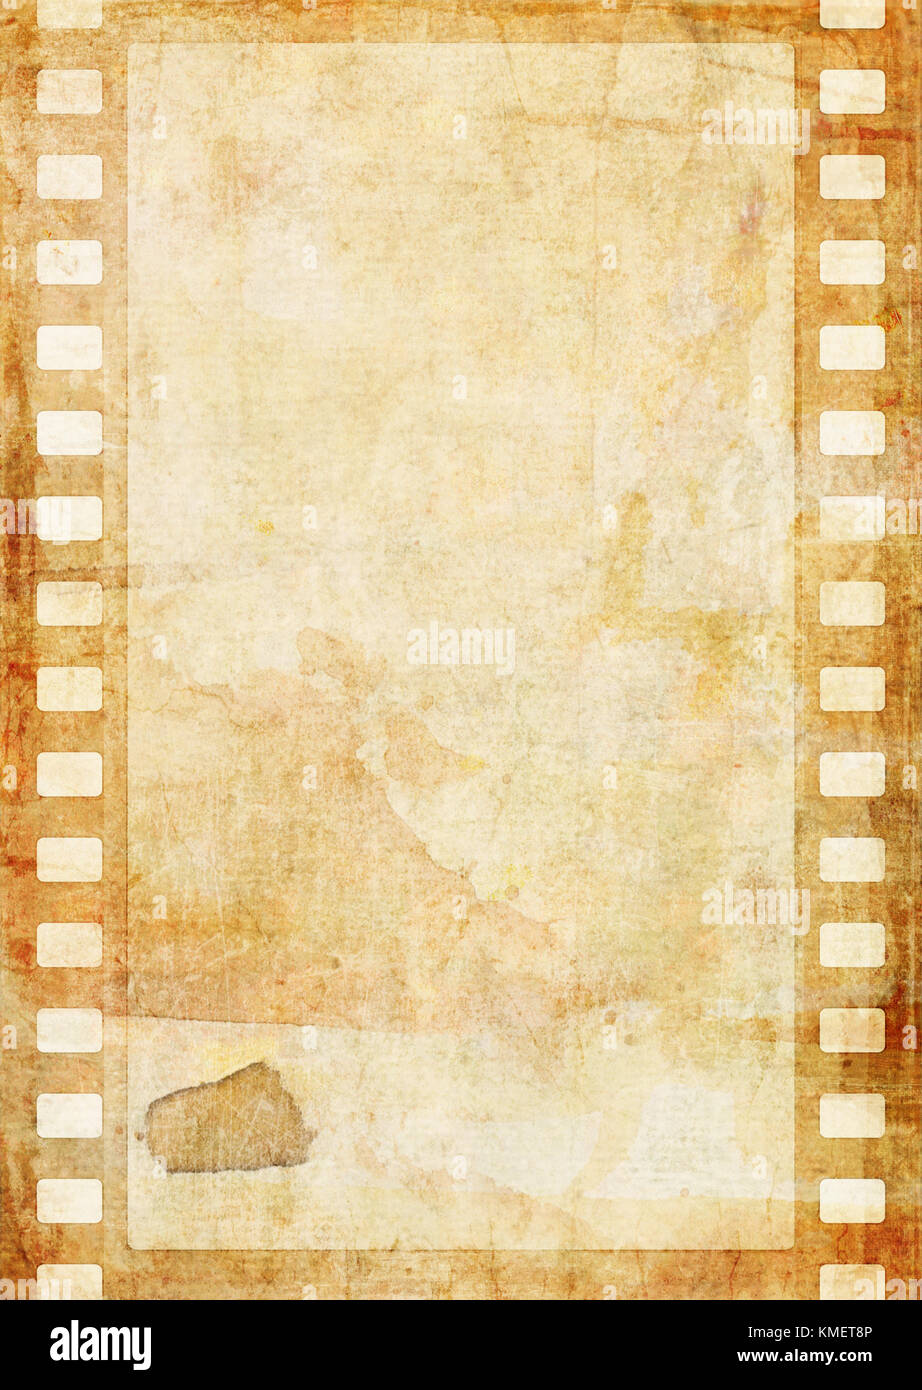 Grunge paper background with film strip border Stock Photo - Alamy